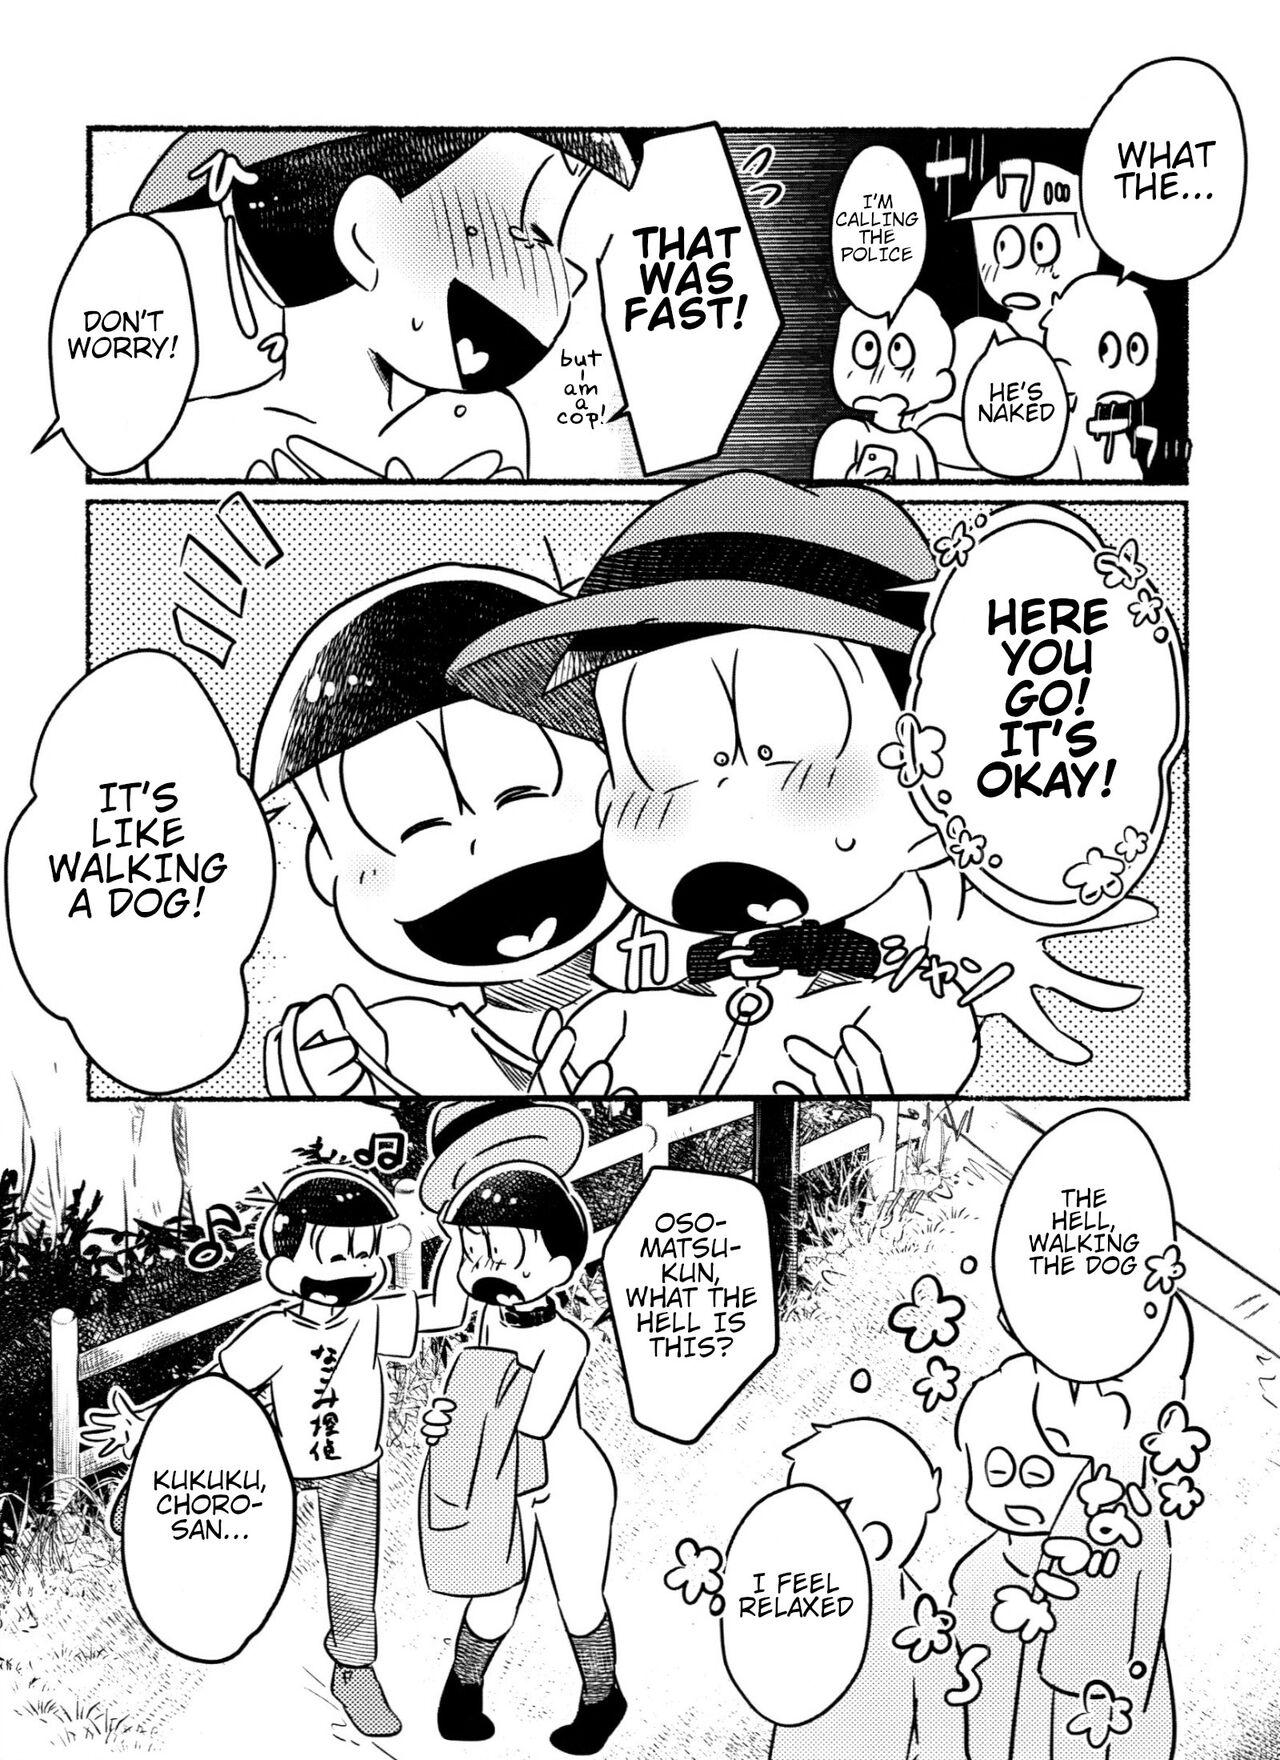 Adult Inspector Choromatsu walks naked at night and does XXX in the public eye R18 book - Osomatsu san Seduction Porn - Page 6